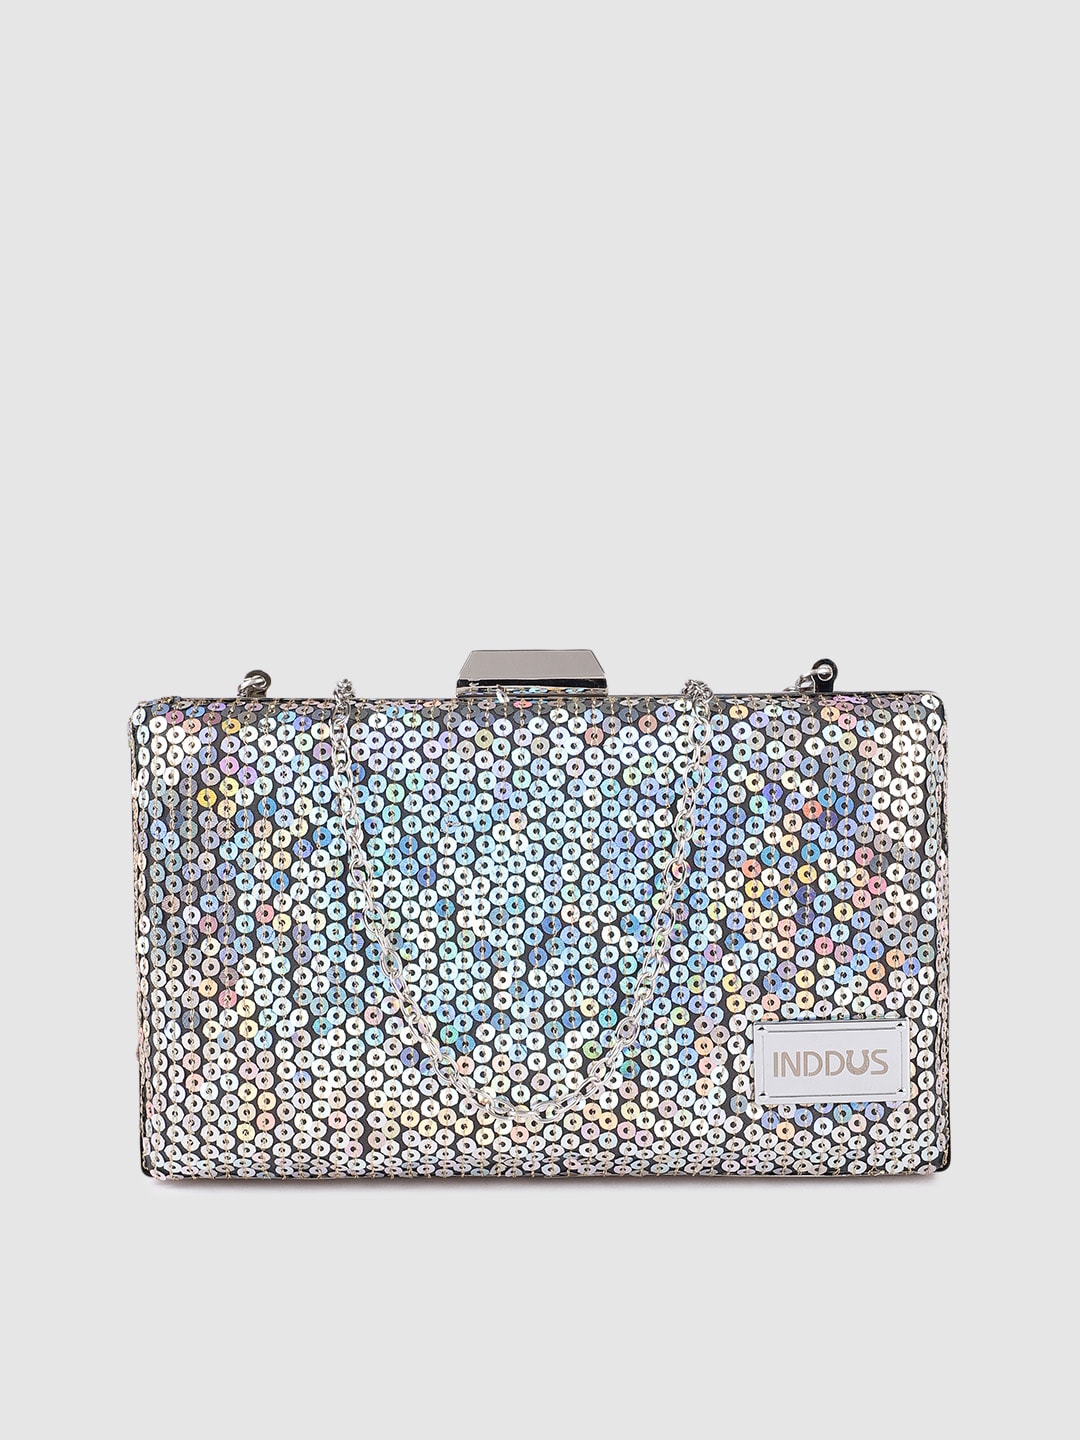 Inddus Silver-Toned Sequinned Box Clutch